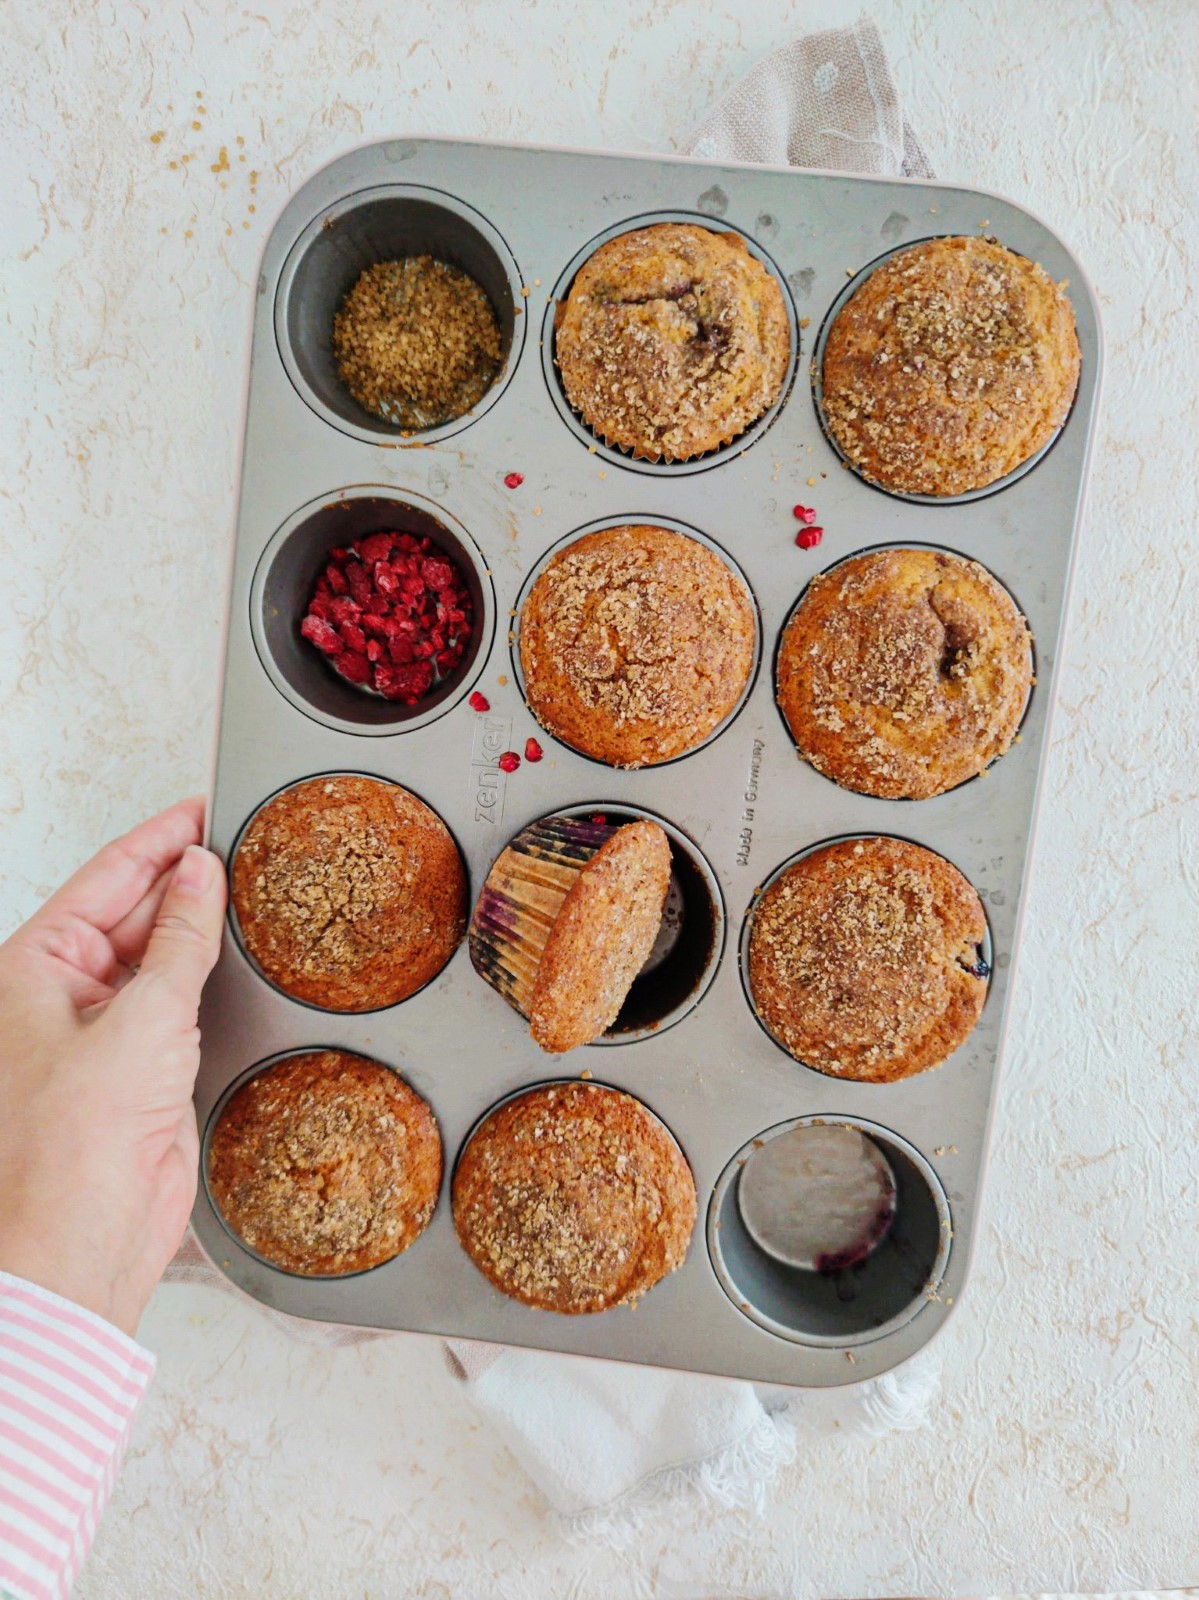 Muffins mit Beeren und Streusel Topping - Muffins with berries and streusel topping